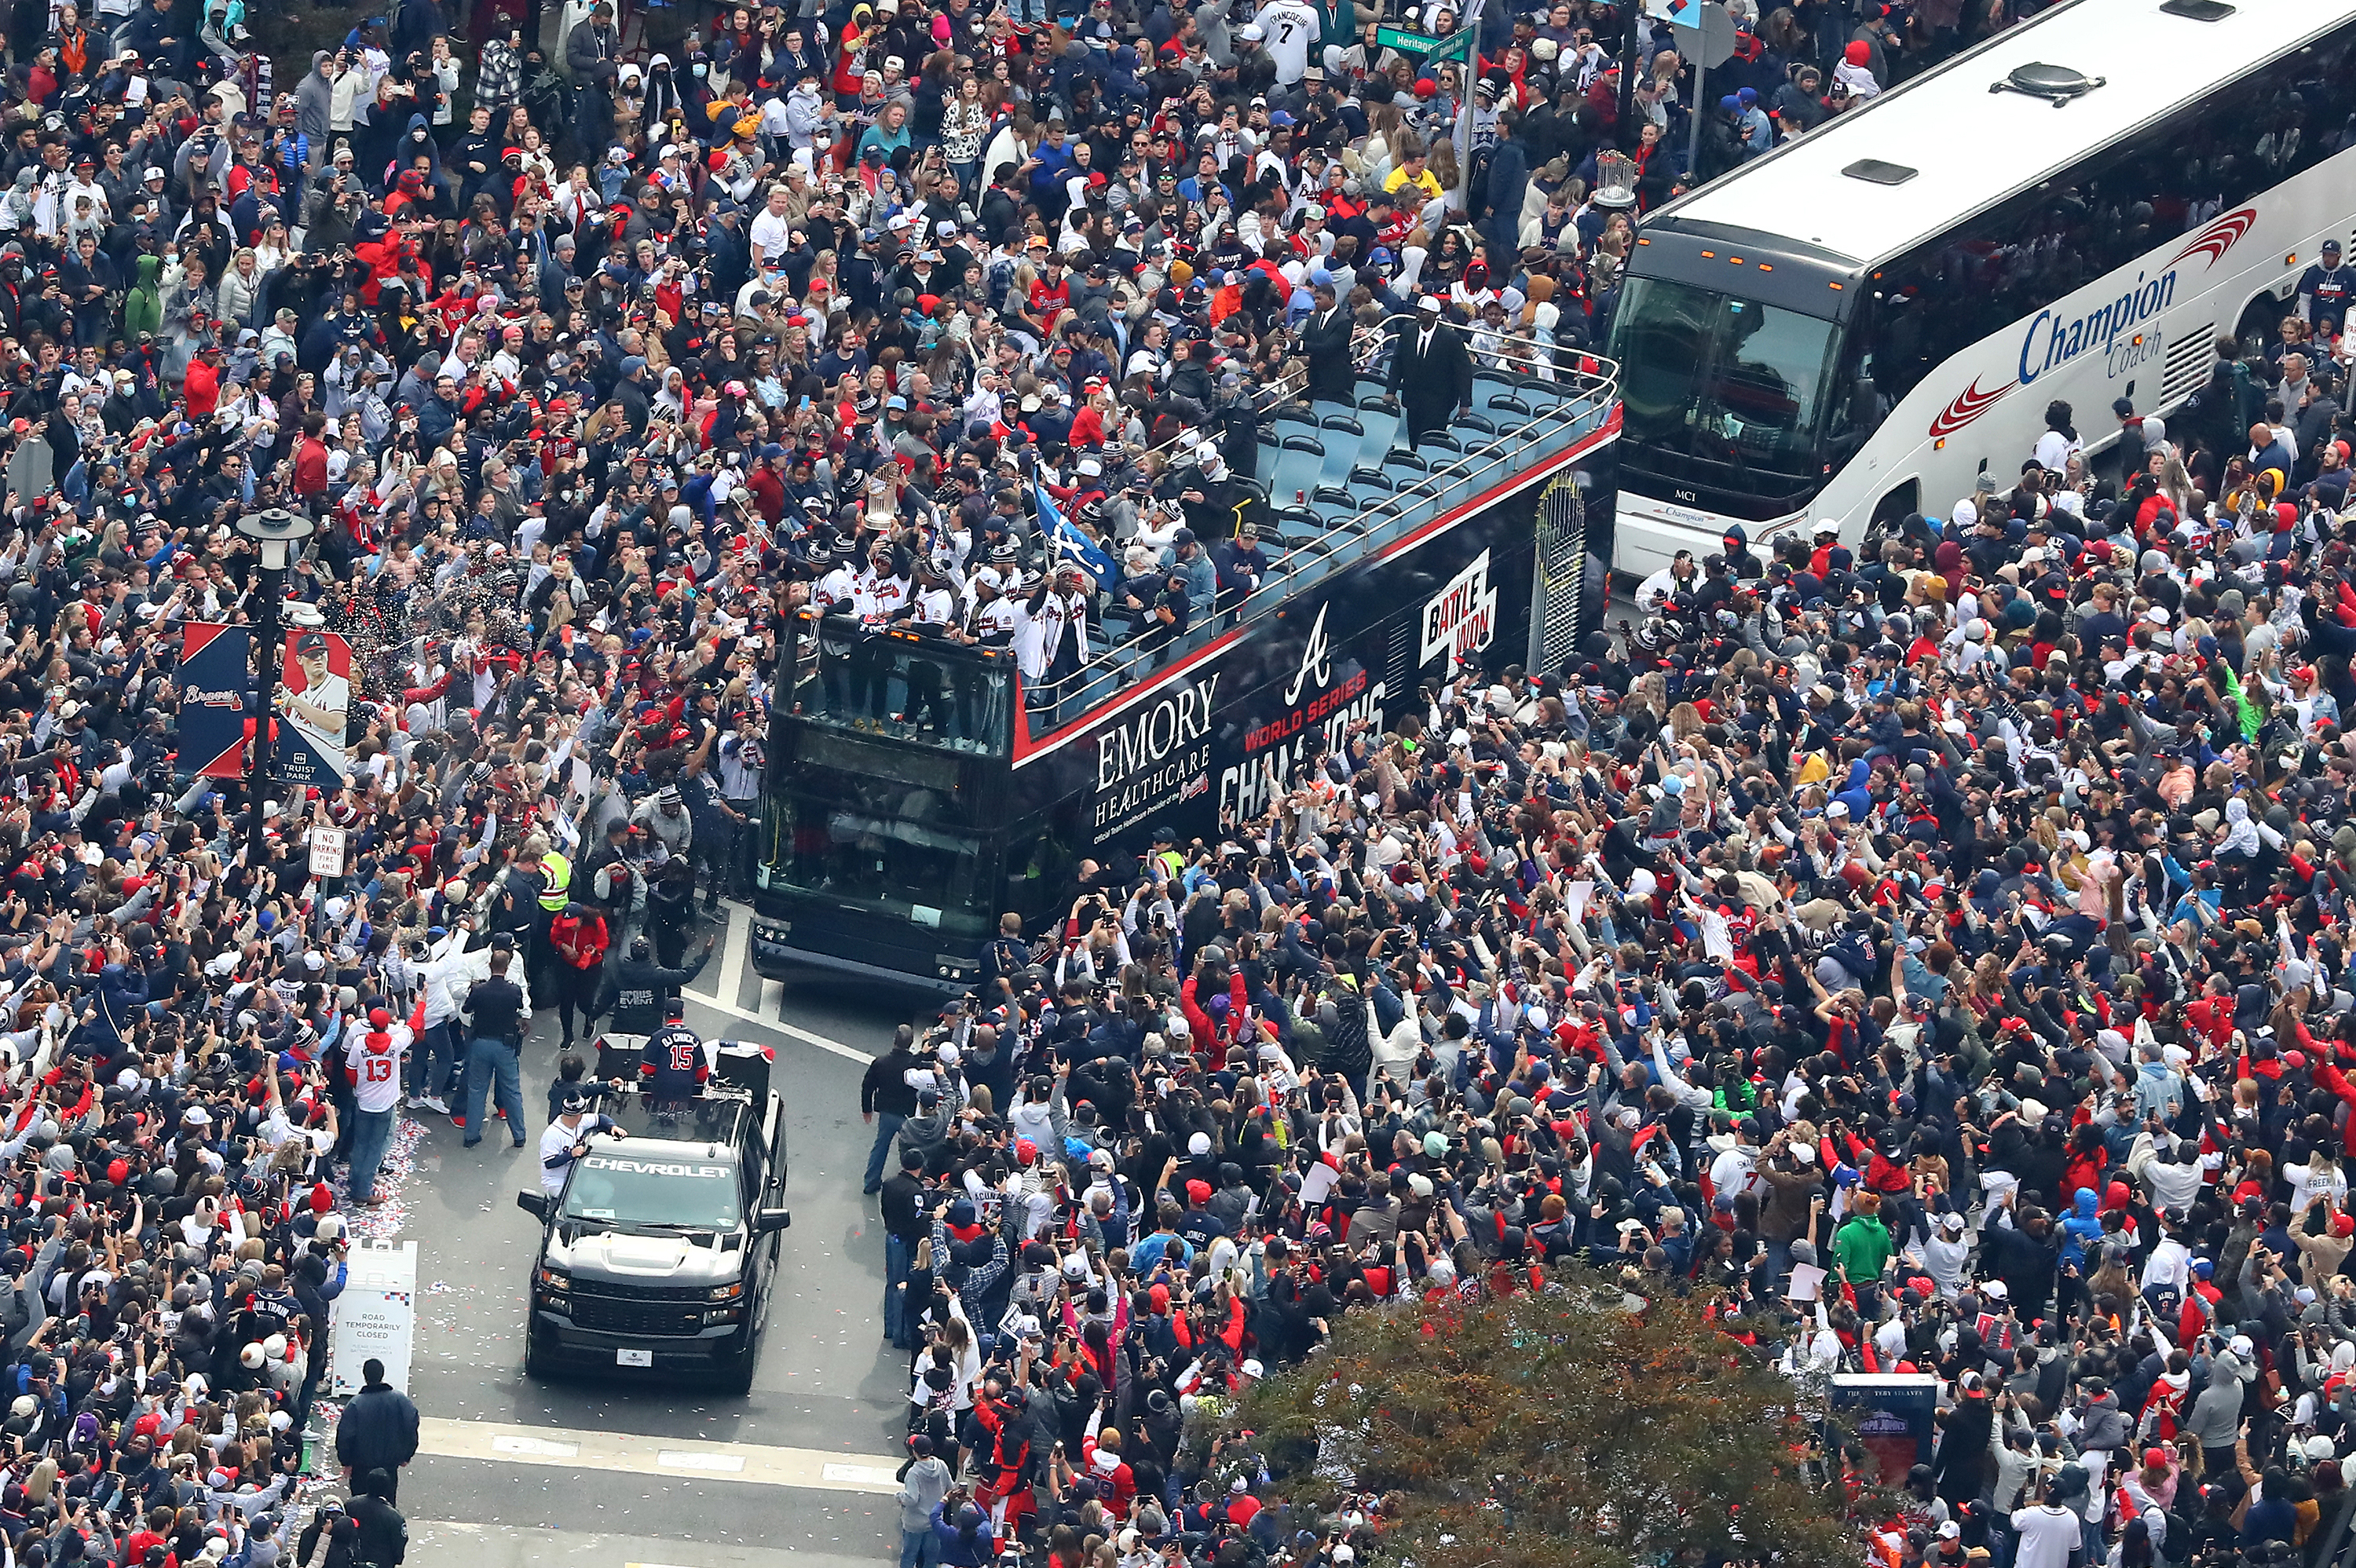 Braves parade, Watch the massive crowd cheer on the Braves